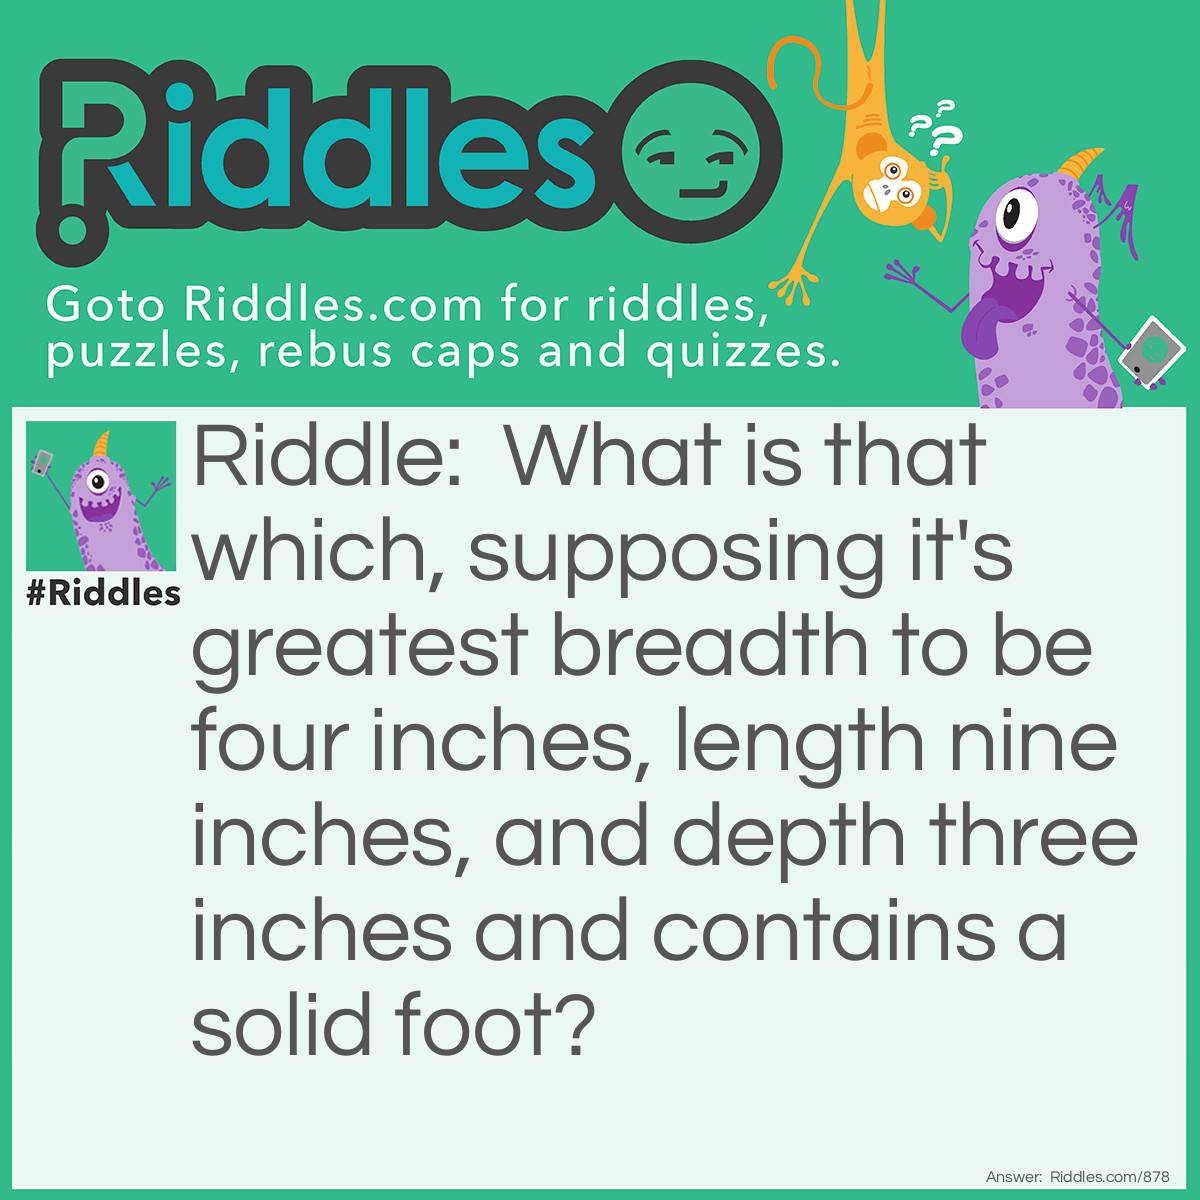 Riddle: What is that which, supposing it's greatest breadth to be four inches, length nine inches, and depth three inches and contains a solid foot? Answer: A shoe.